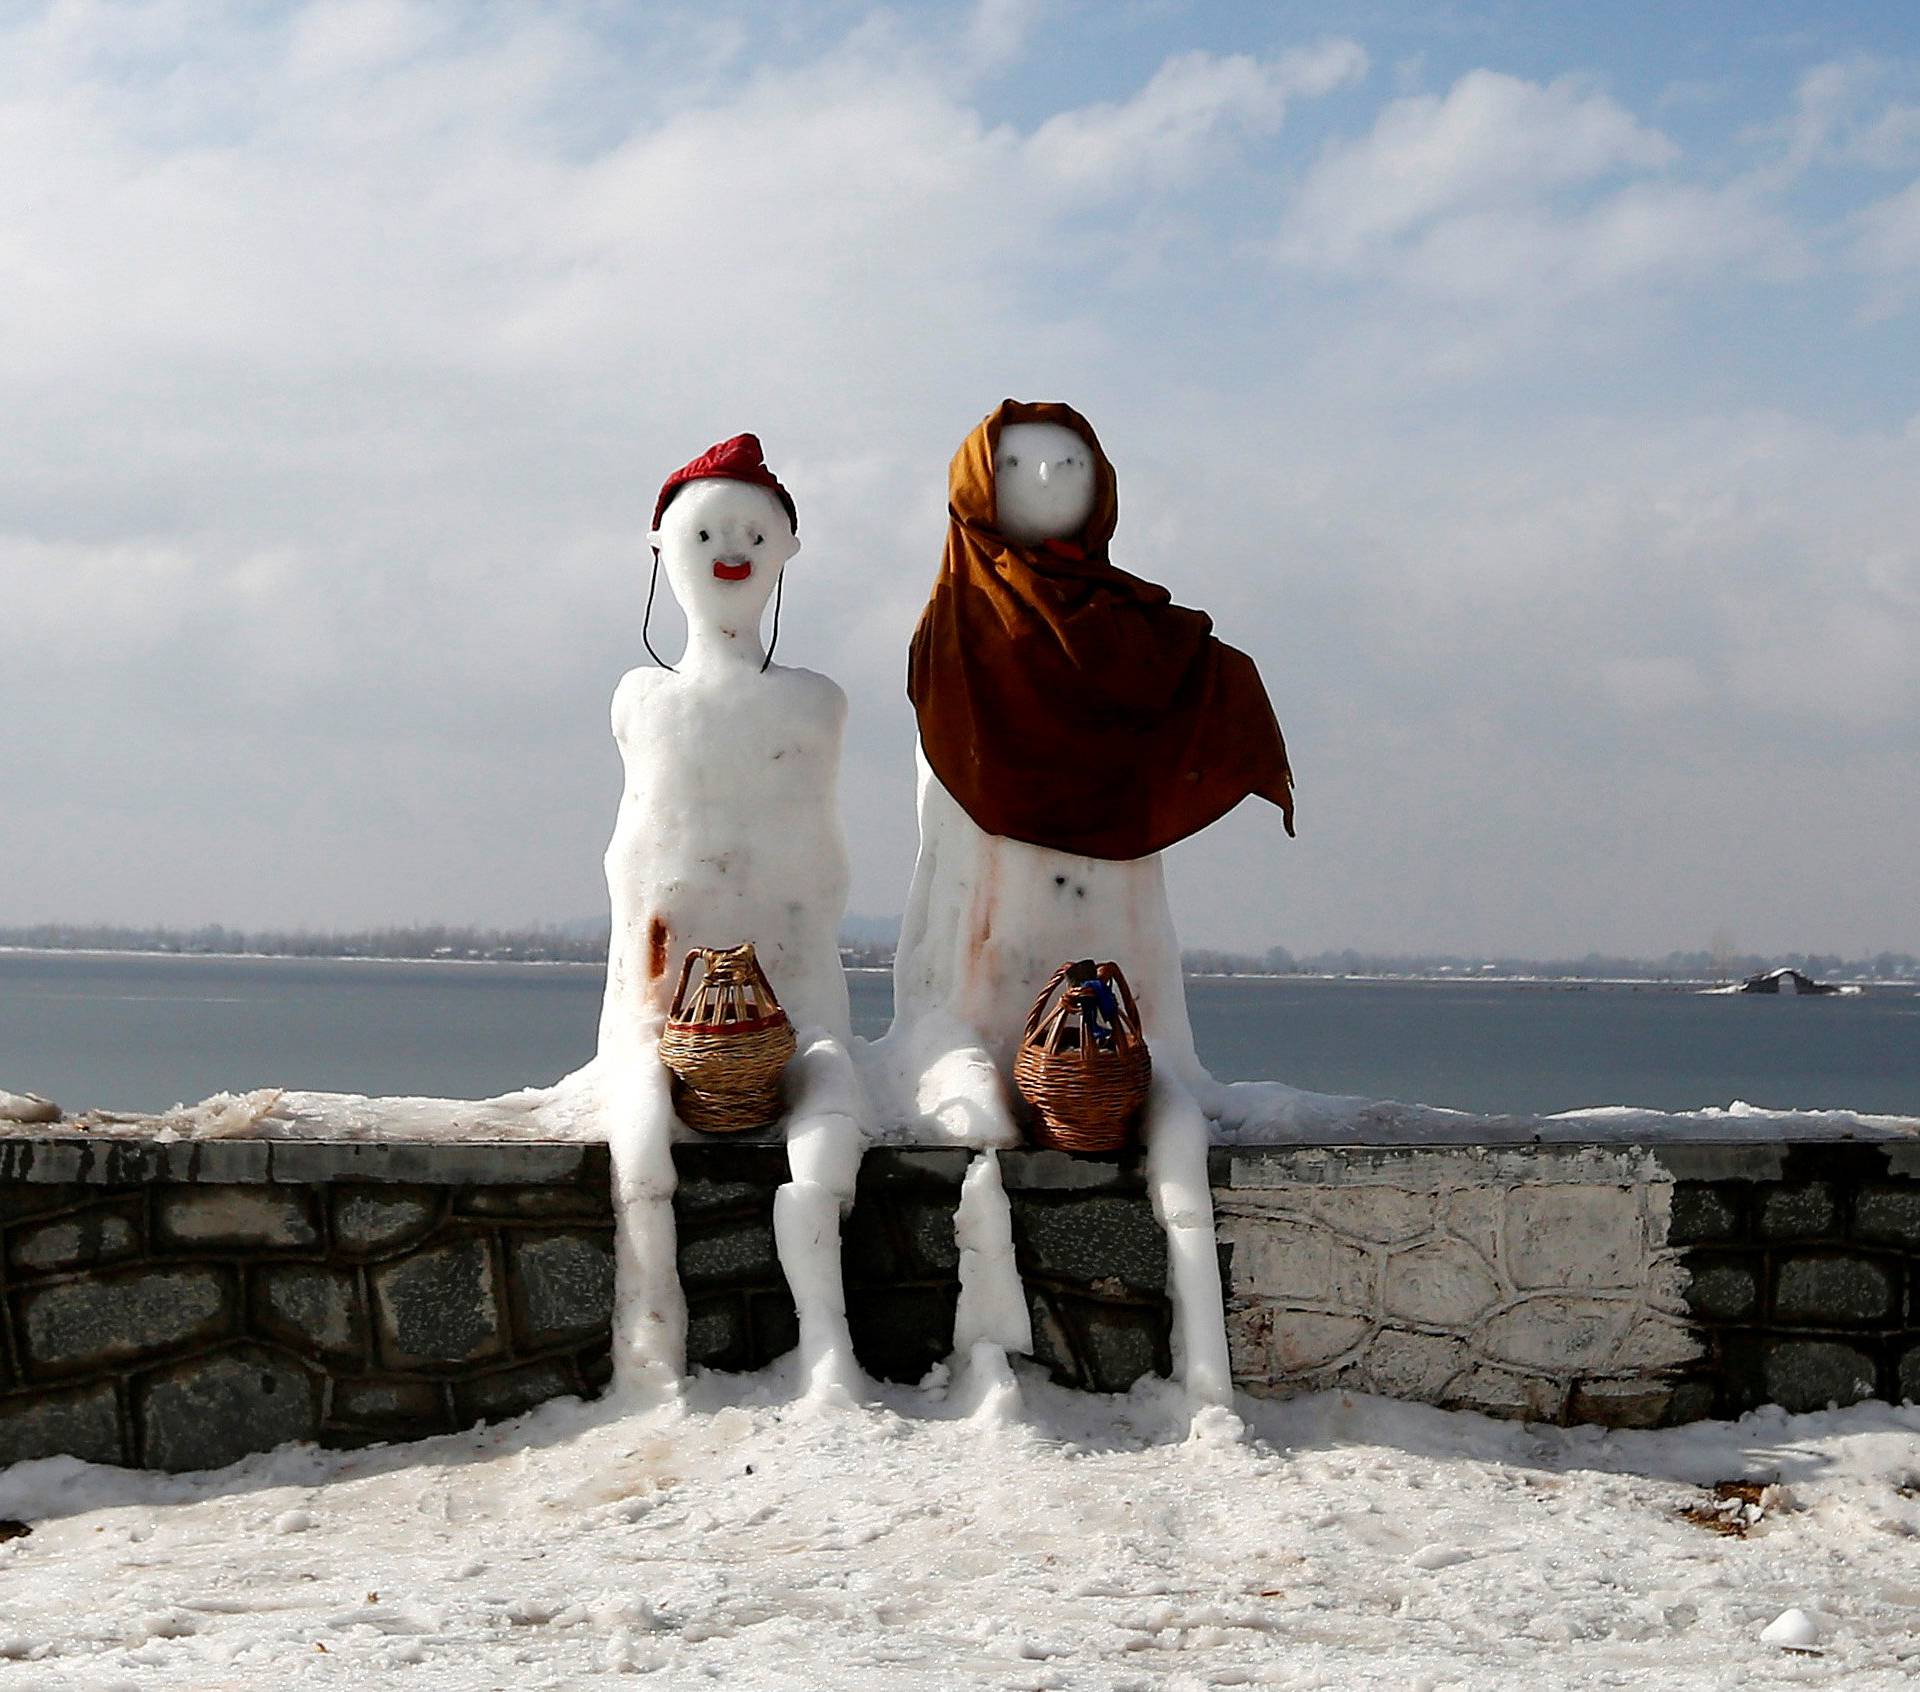 A snow man and a snow woman with "Kangris", traditional fire pots, are installed on the banks of Dal Lake in Srinagar